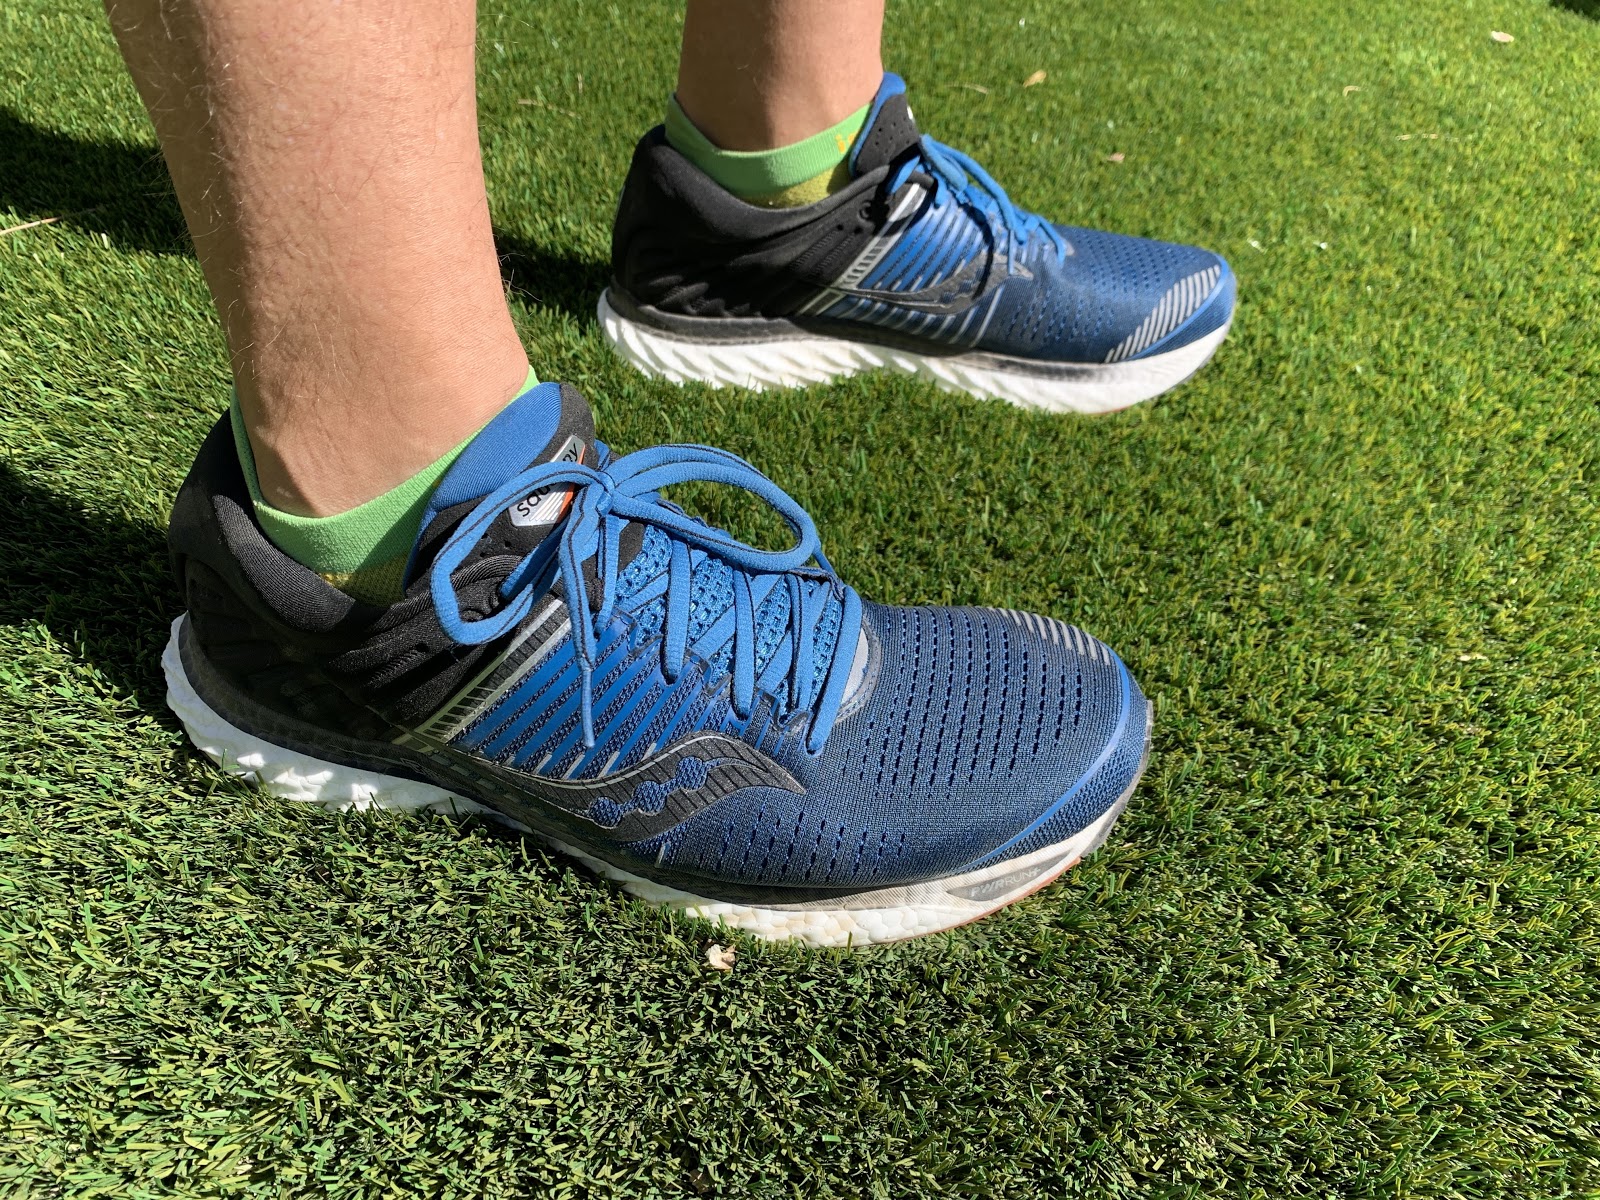 Road Trail Run: Jeff Beck's 2019 Running Shoes and Gear of the Year